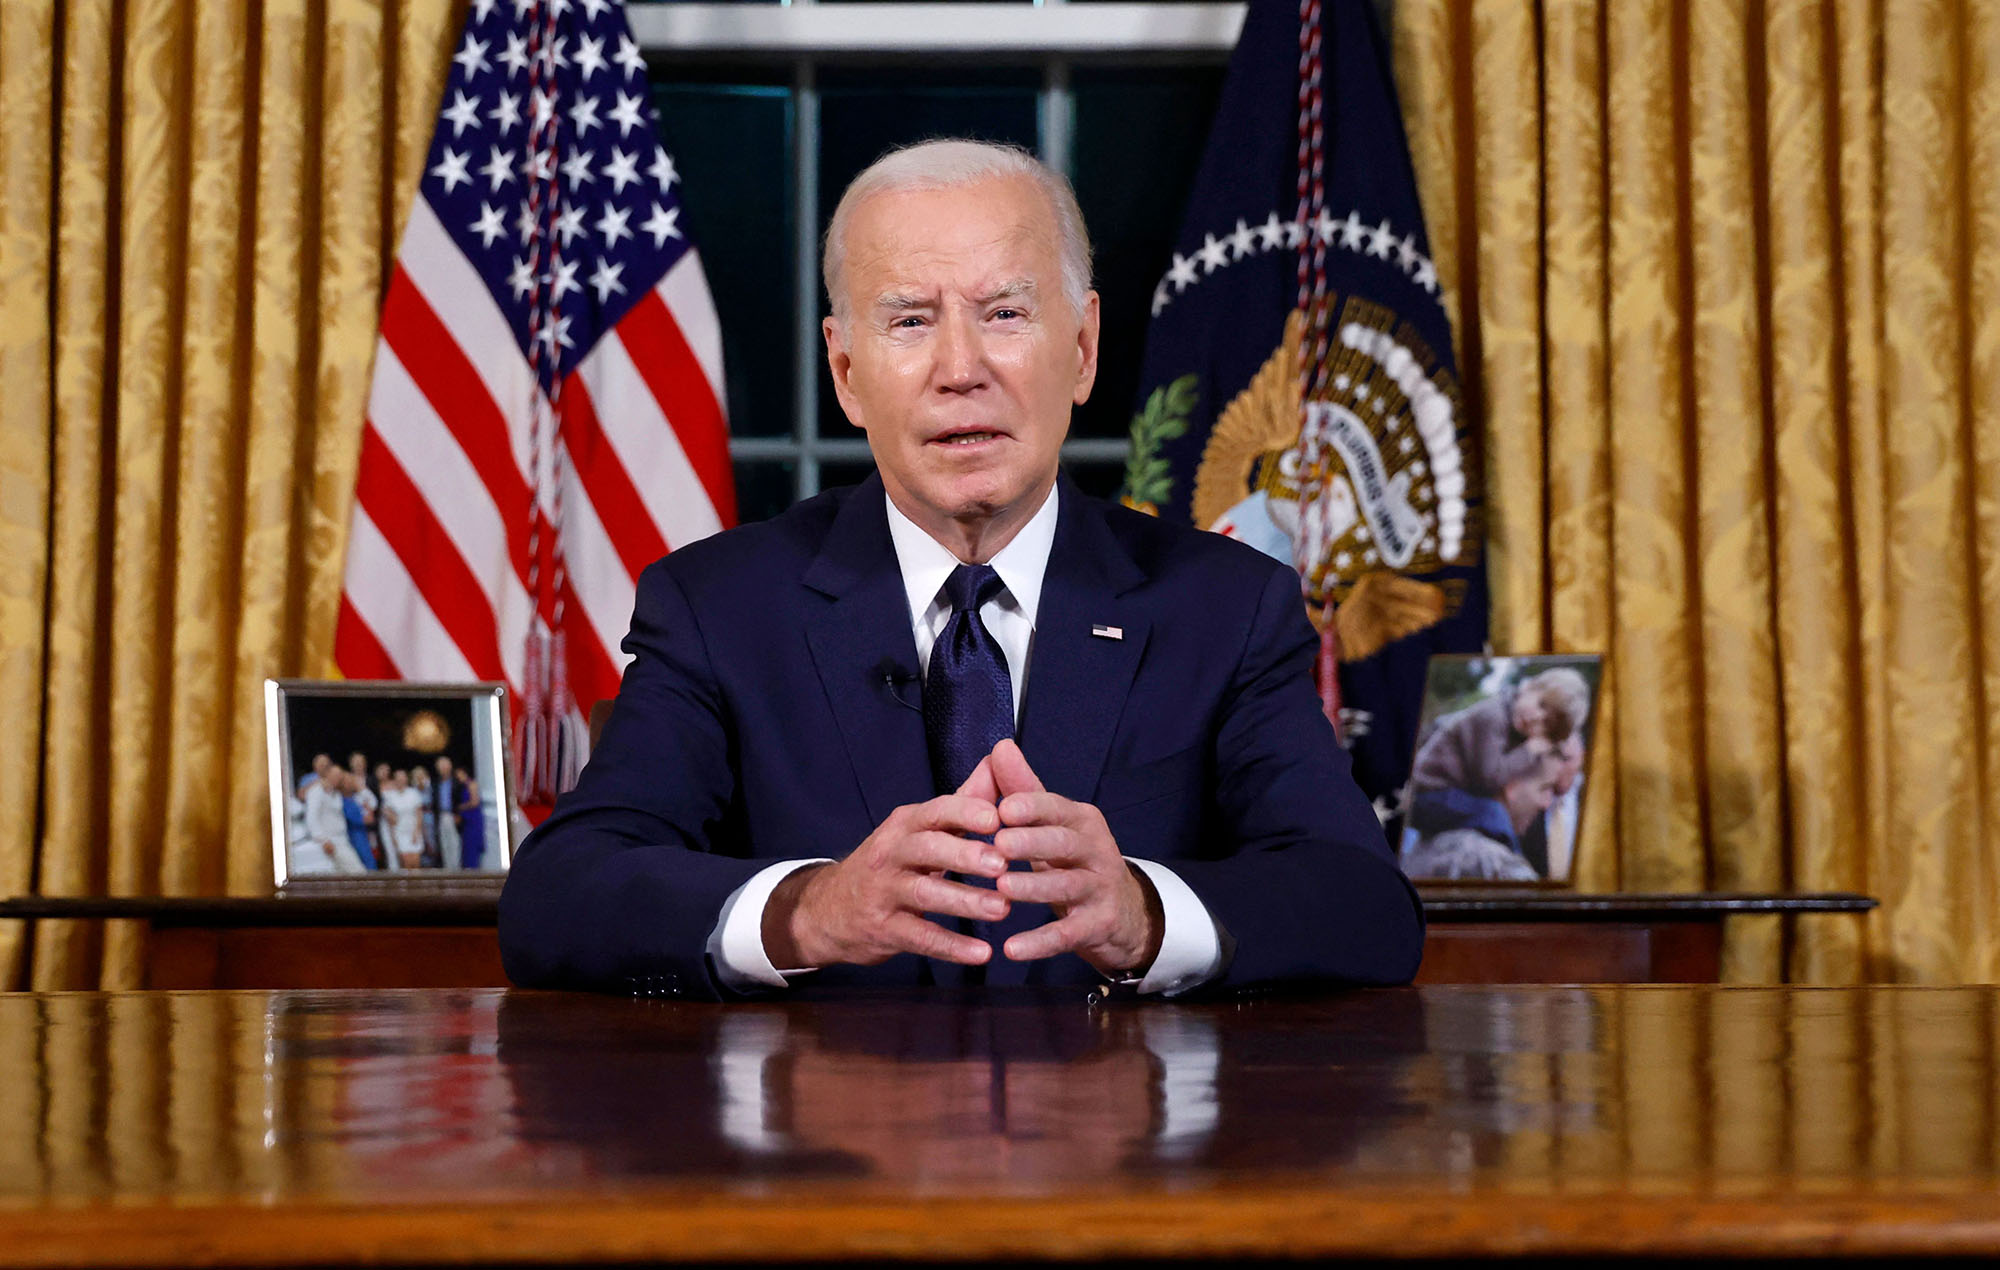 US President Joe Biden addresses the nation on the conflict between Israel and Gaza from the Oval Office of the White House in Washington, DC, on October 19.